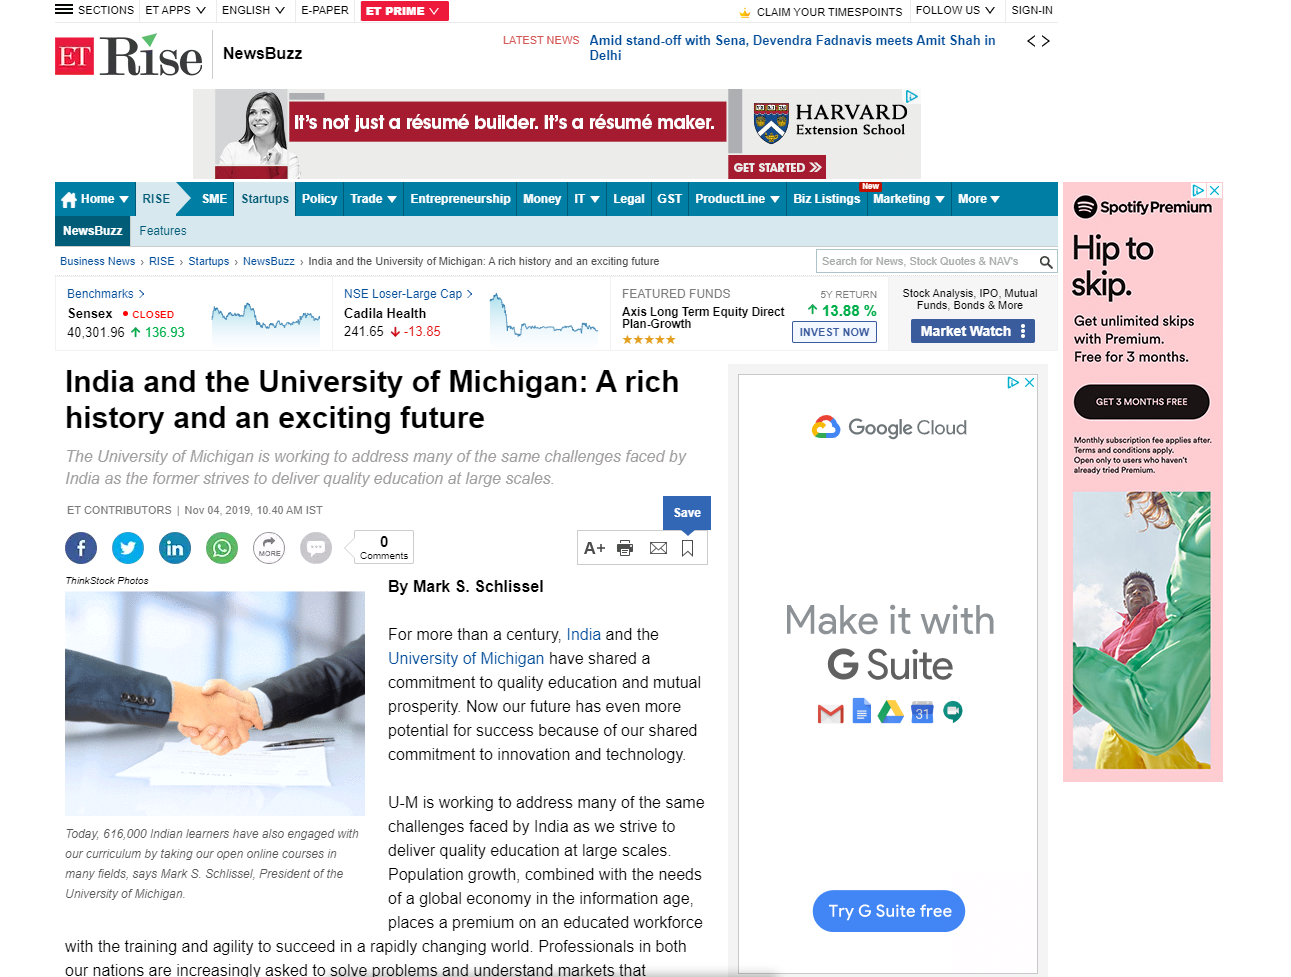 India and the University of Michigan: A Rich History and an Exciting Future